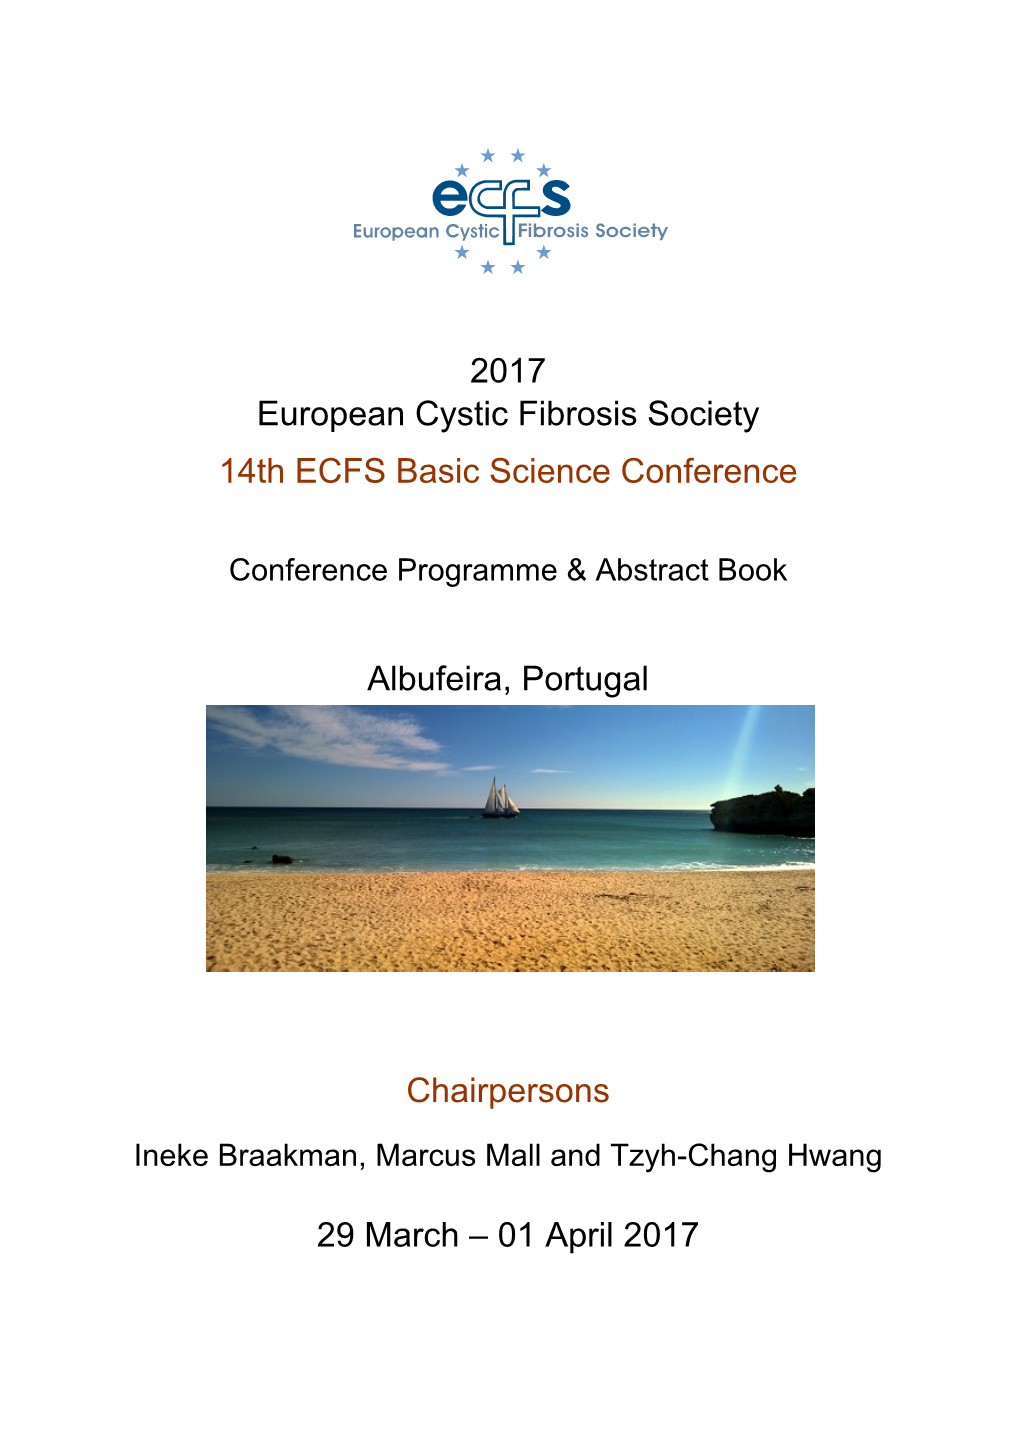 2017 European Cystic Fibrosis Society 14Th ECFS Basic Science Conference